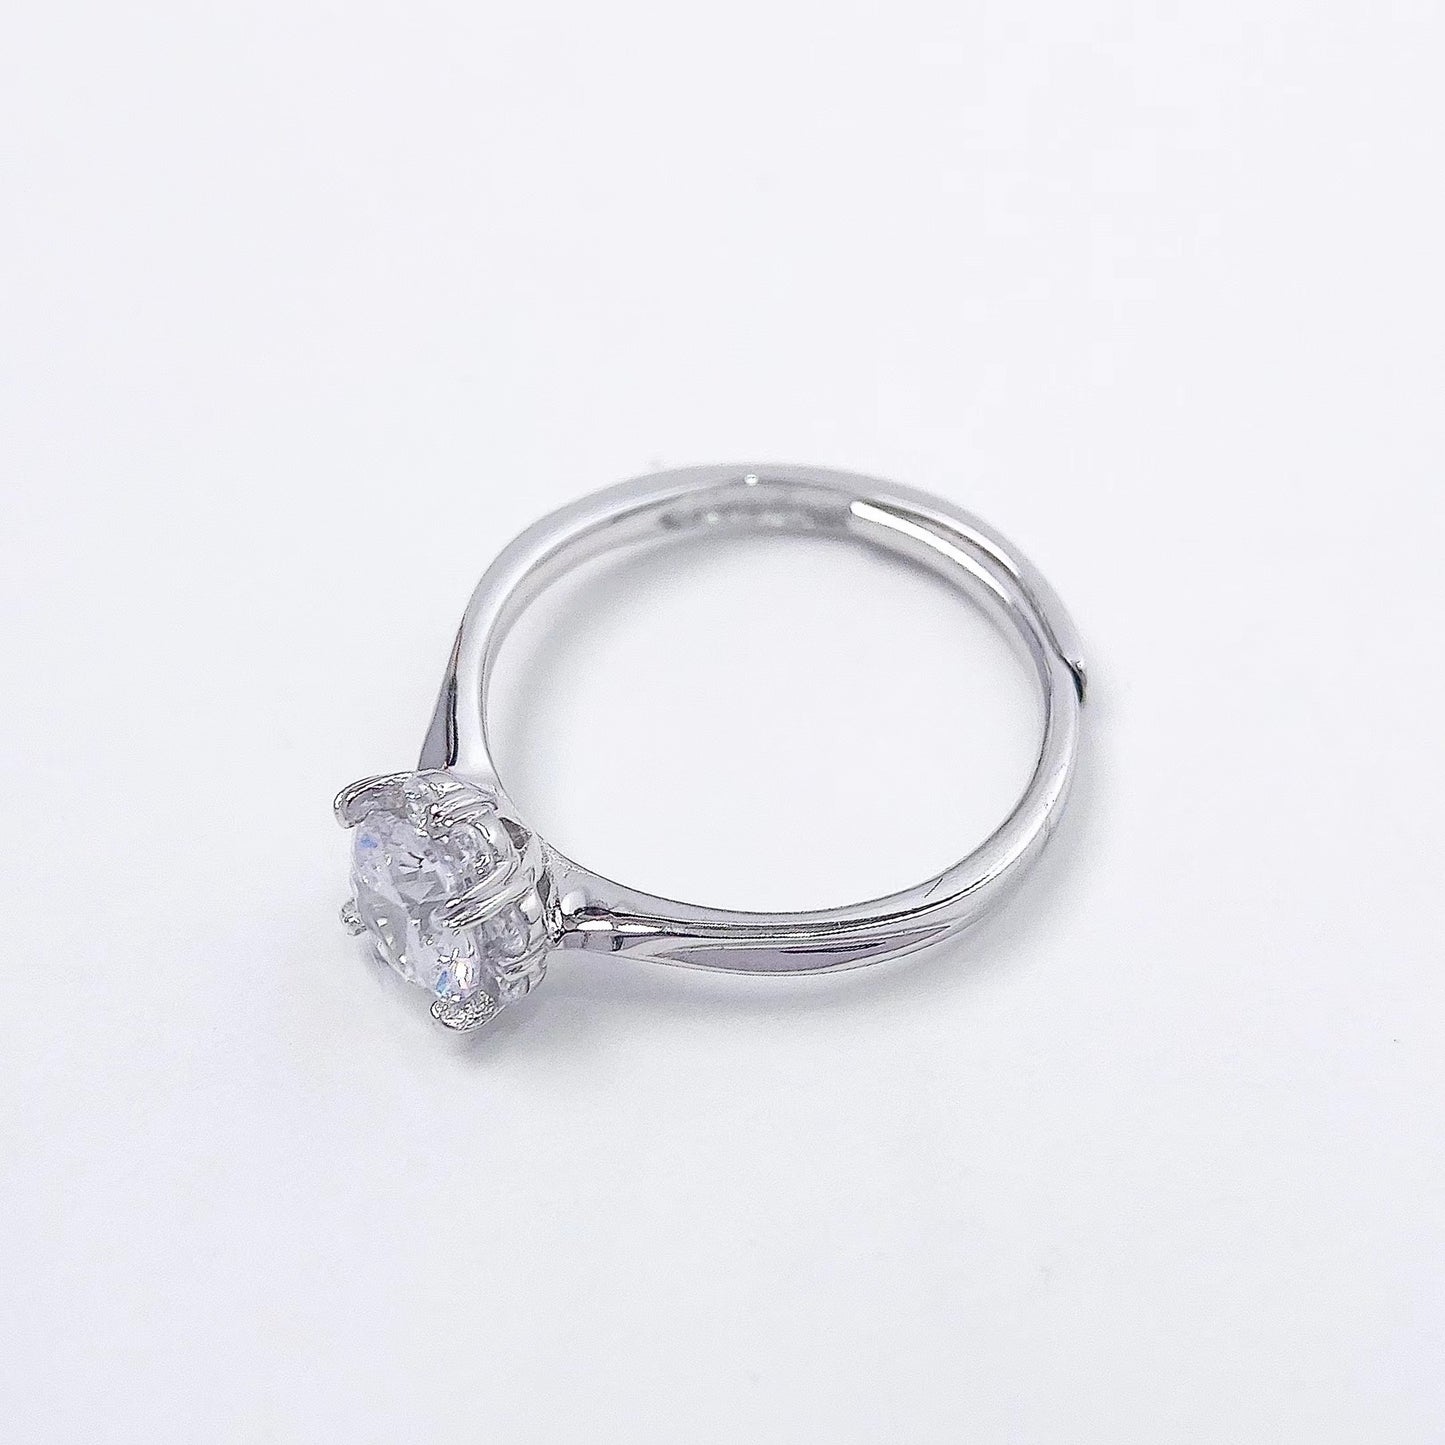 Four Heart-shape Prongs Round Zircon Flower Solitaire Silver Ring for Women